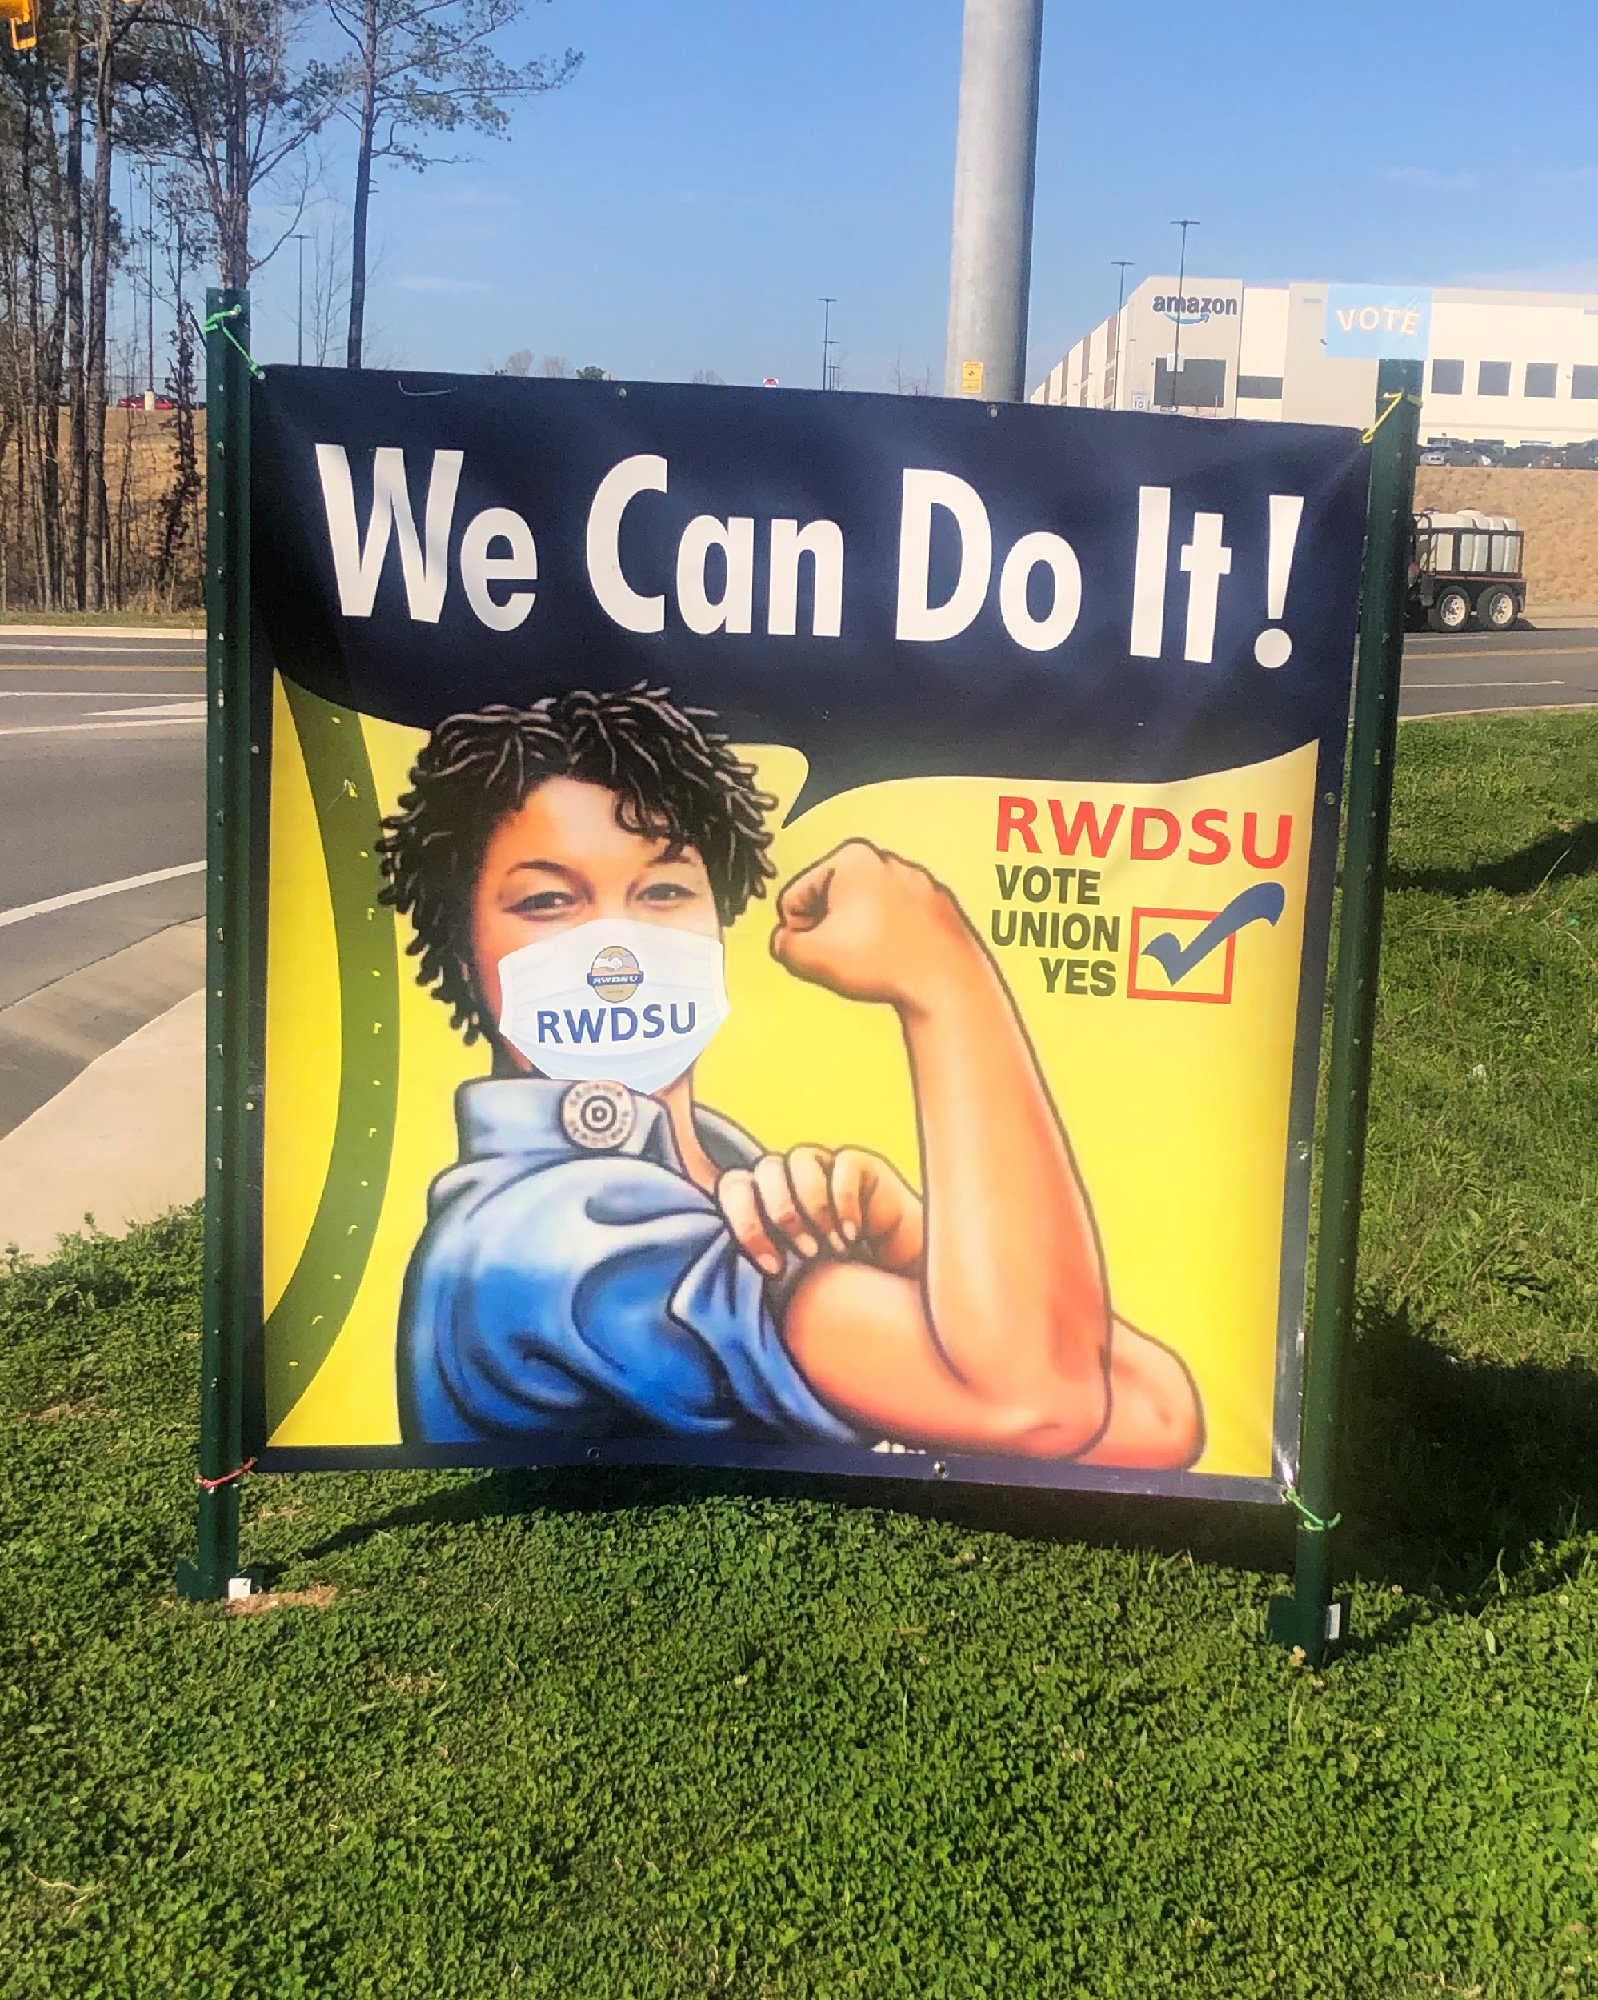 Union election sign outside the entrance to Amazon's warehouse in Bessemer, Alabama on March 10, 2020. 